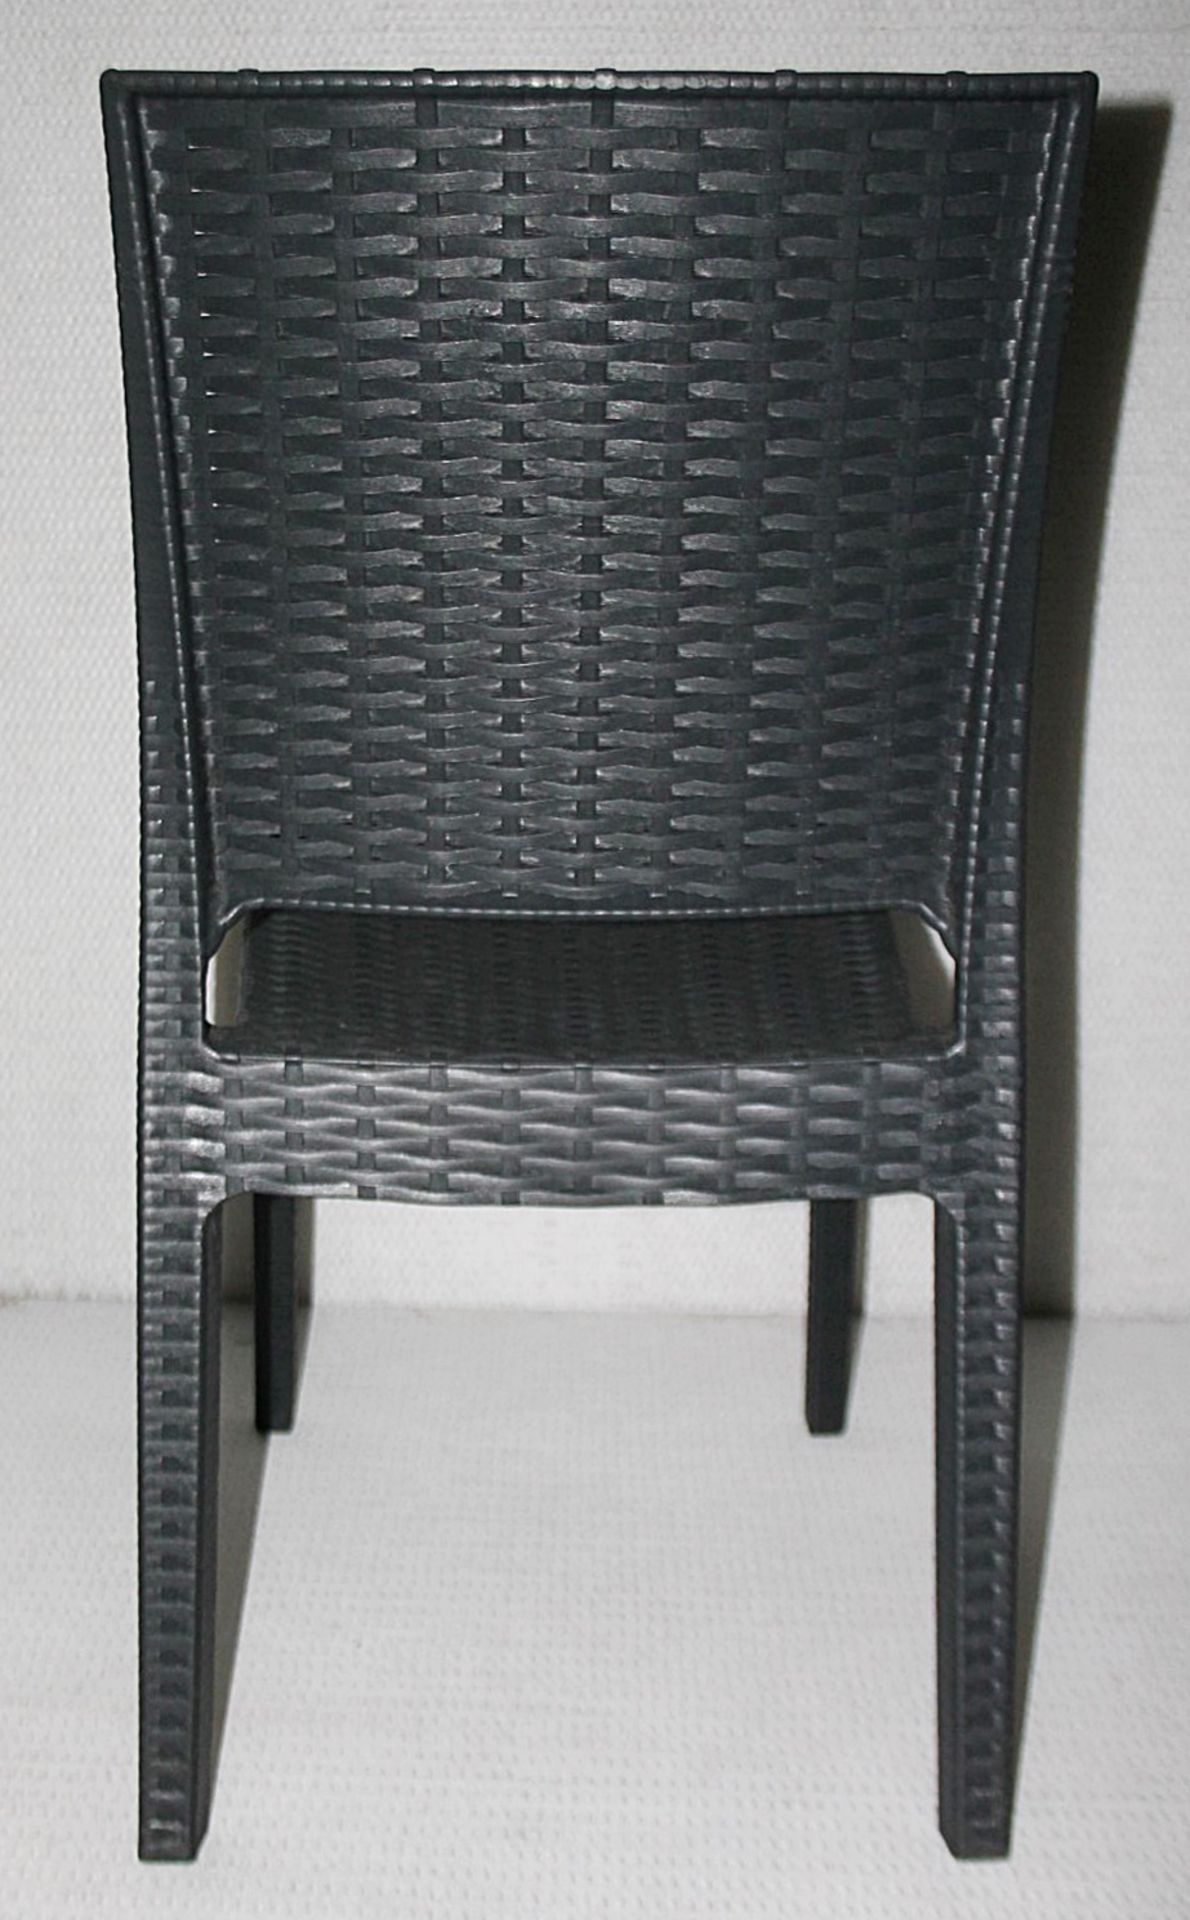 4 x SIESTA EXCLUSIVE 'Florida' Commercial Stackable Rattan-style Chairs In Dark Grey -CL987 - - Image 10 of 13